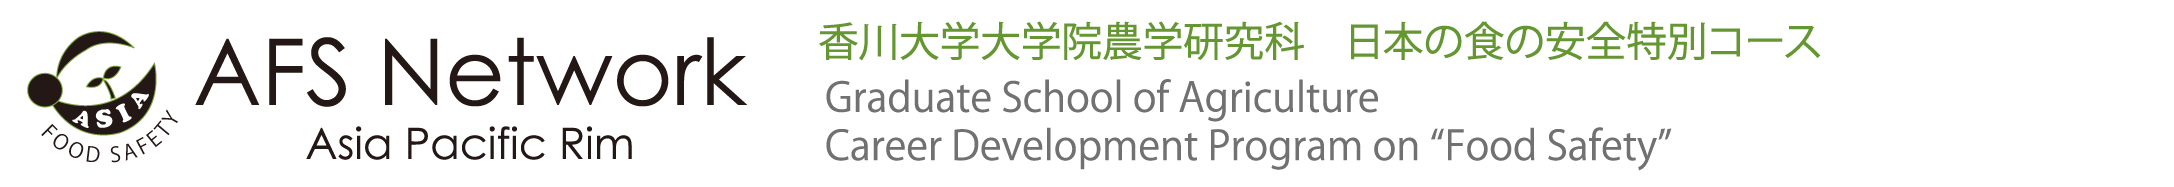 Network Asia Pacific Rim　香川大学大学院農学研究科「日本の食の安全」留学生特別コース　Graduate School of Agriculture　Career Development Program for Foreign Students in Japan